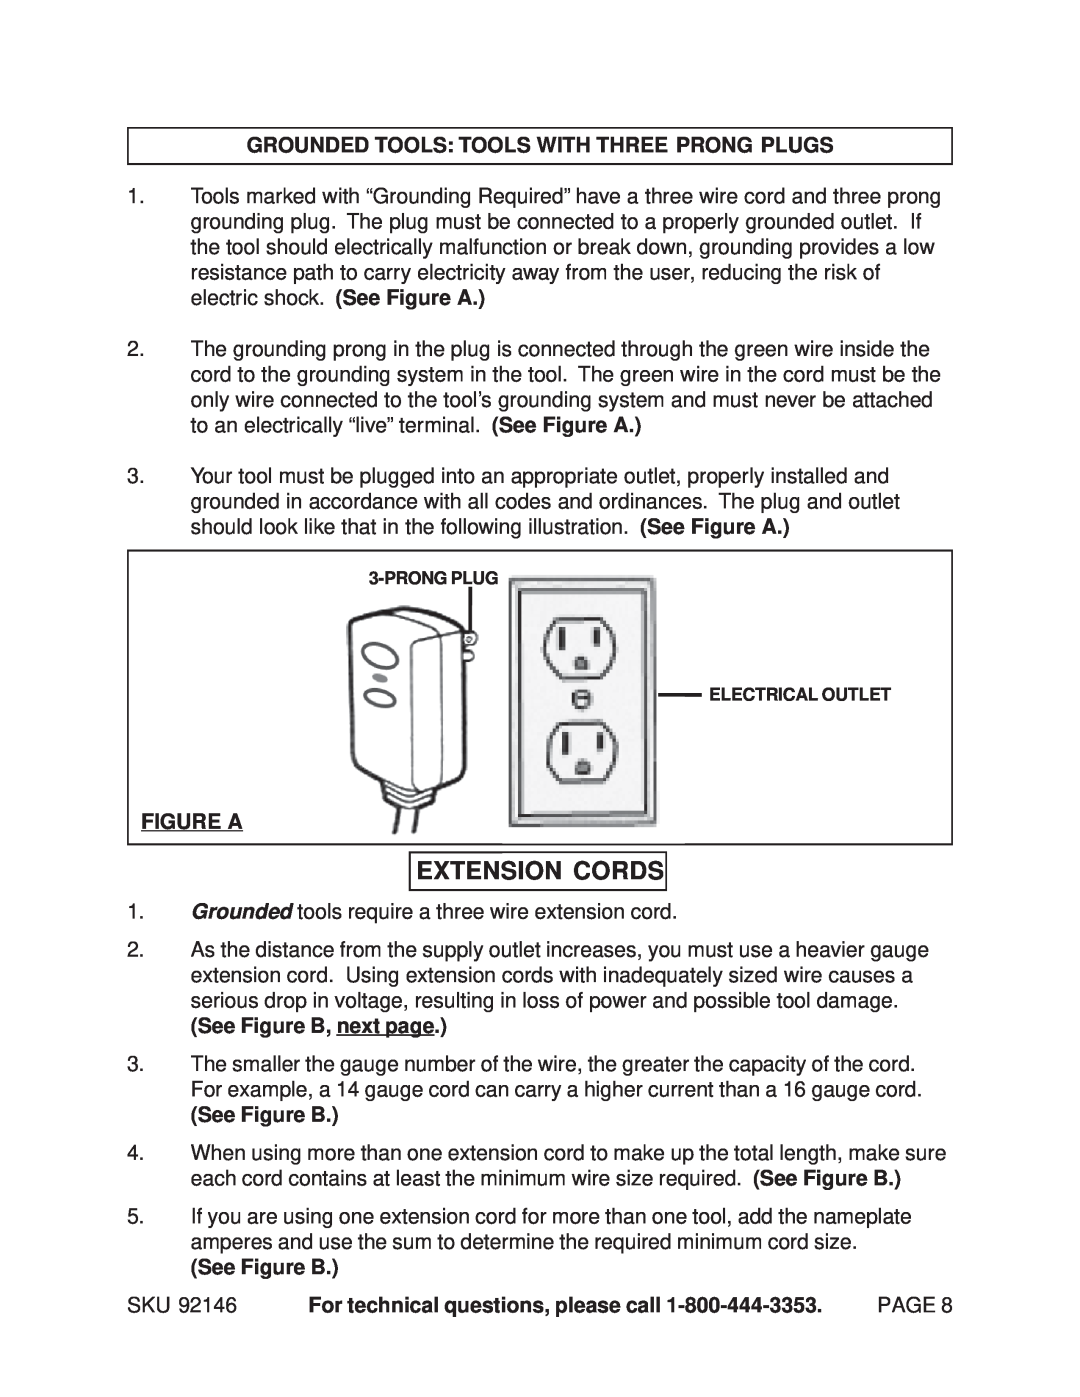 Chicago Electric 92146 Extension Cords, Grounded Tools Tools With Three Prong Plugs, Figure A, See Figure B, next page 